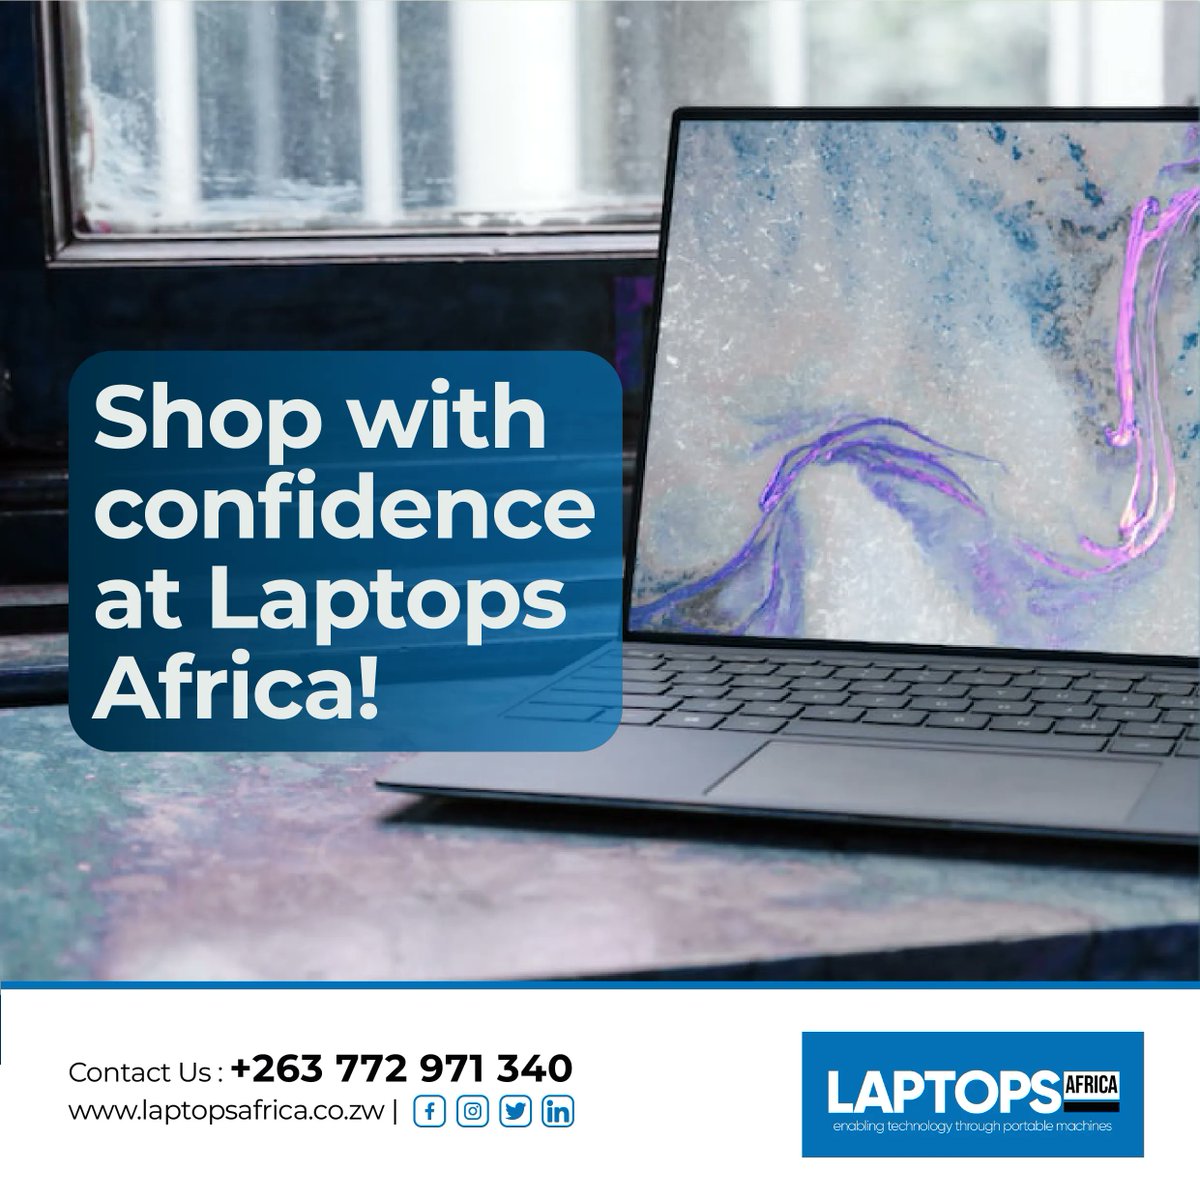 Upgrade your work-from-home setup with Laptops Africa this May! We have a wide range of laptops, monitors, keyboards and other accessories to make your work easier and more efficient. #Work&HomeUpgrade #LaptopsAfrica